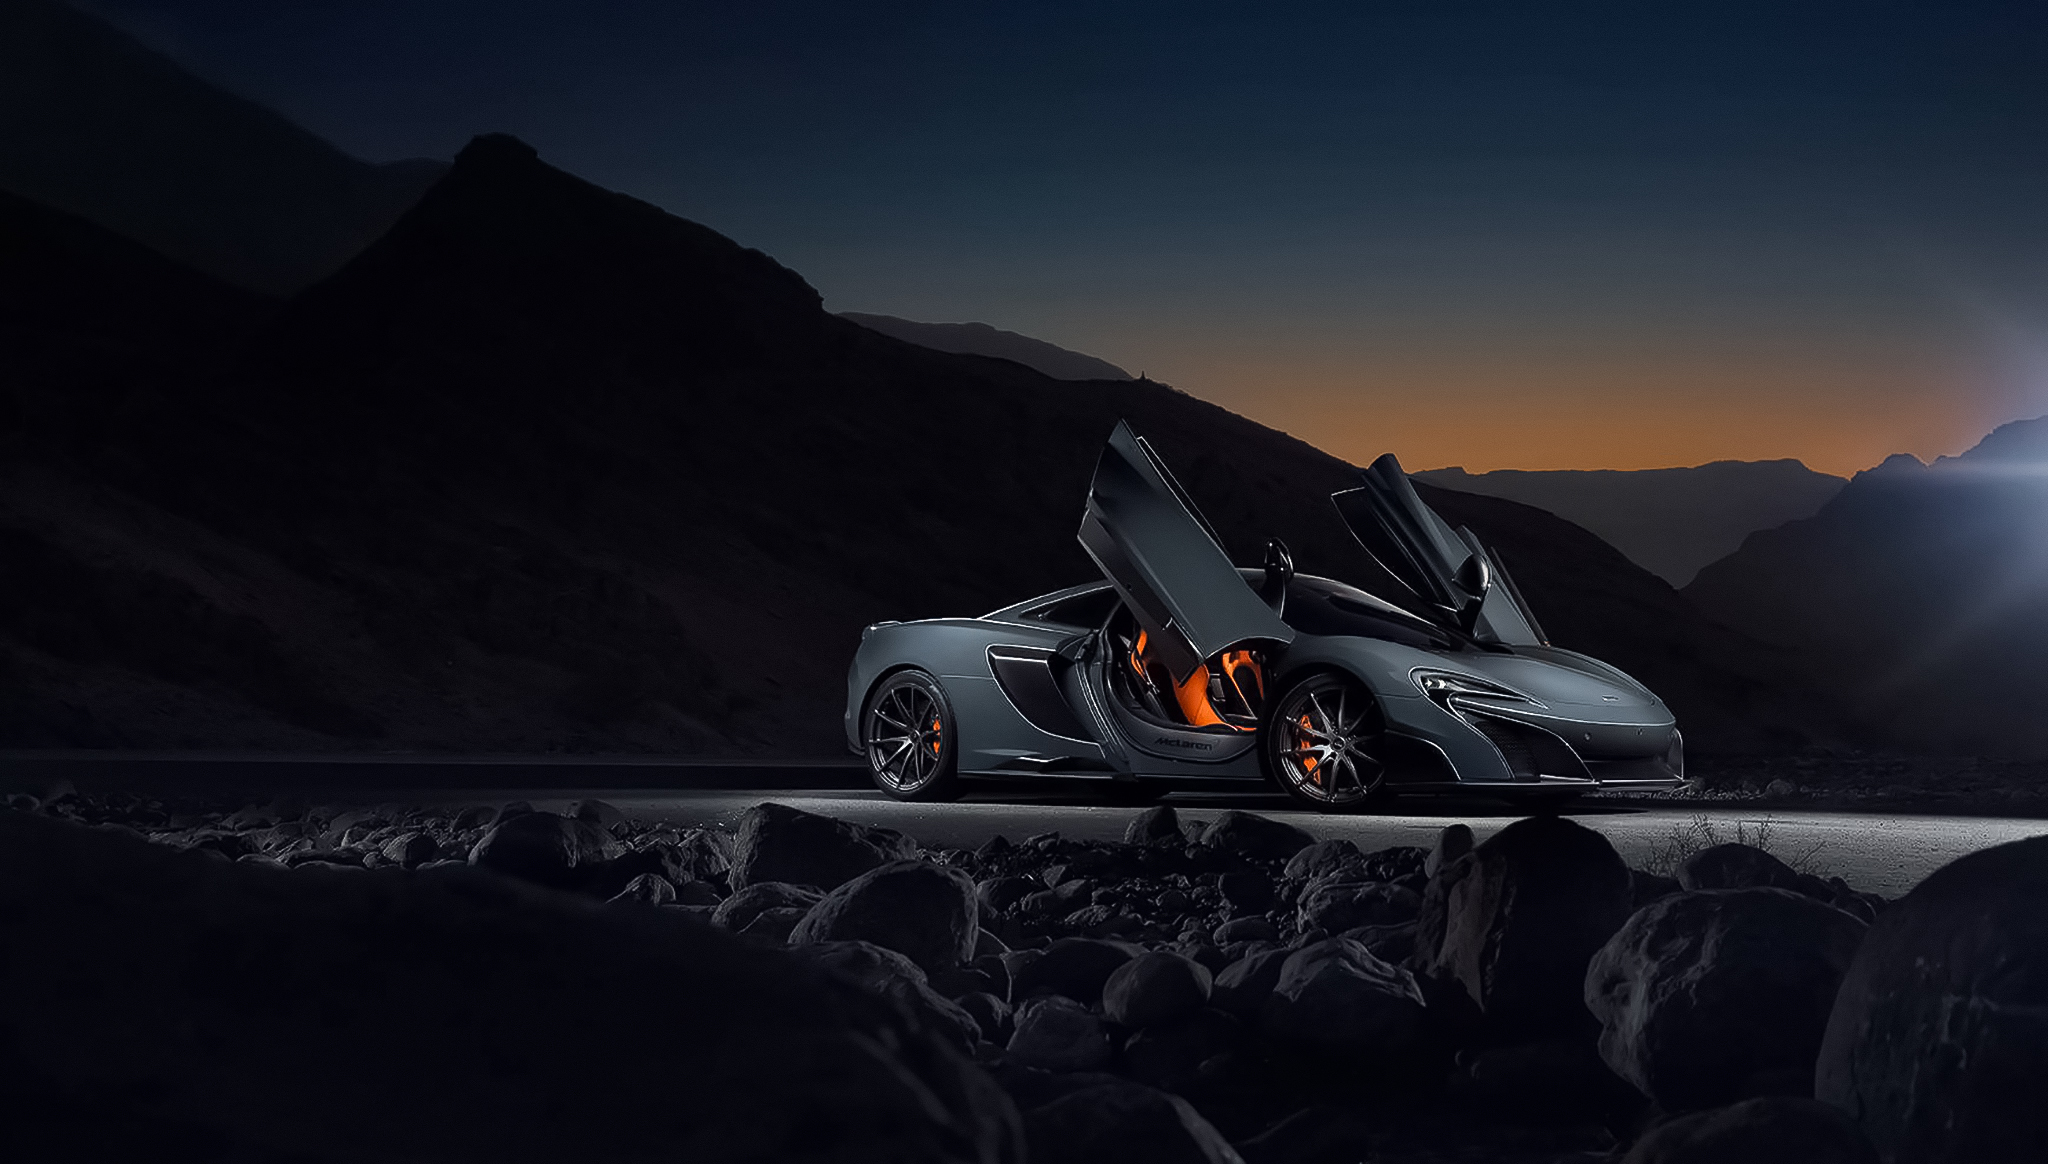 82006 free wallpaper 480x800 for phone, download images night, side view, 675lt, mclaren 480x800 for mobile